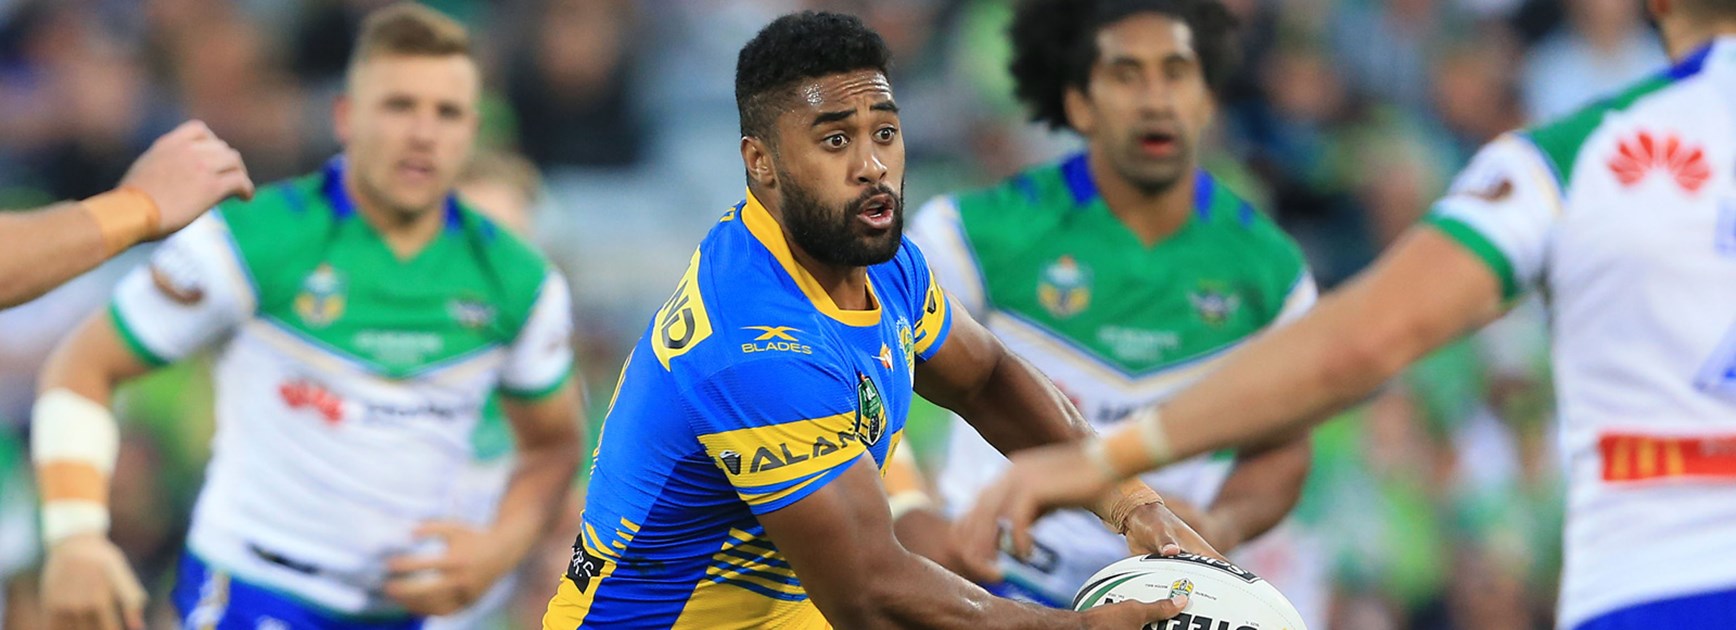 Michael Jennings in action for the Eels against Canberra in Round 5.